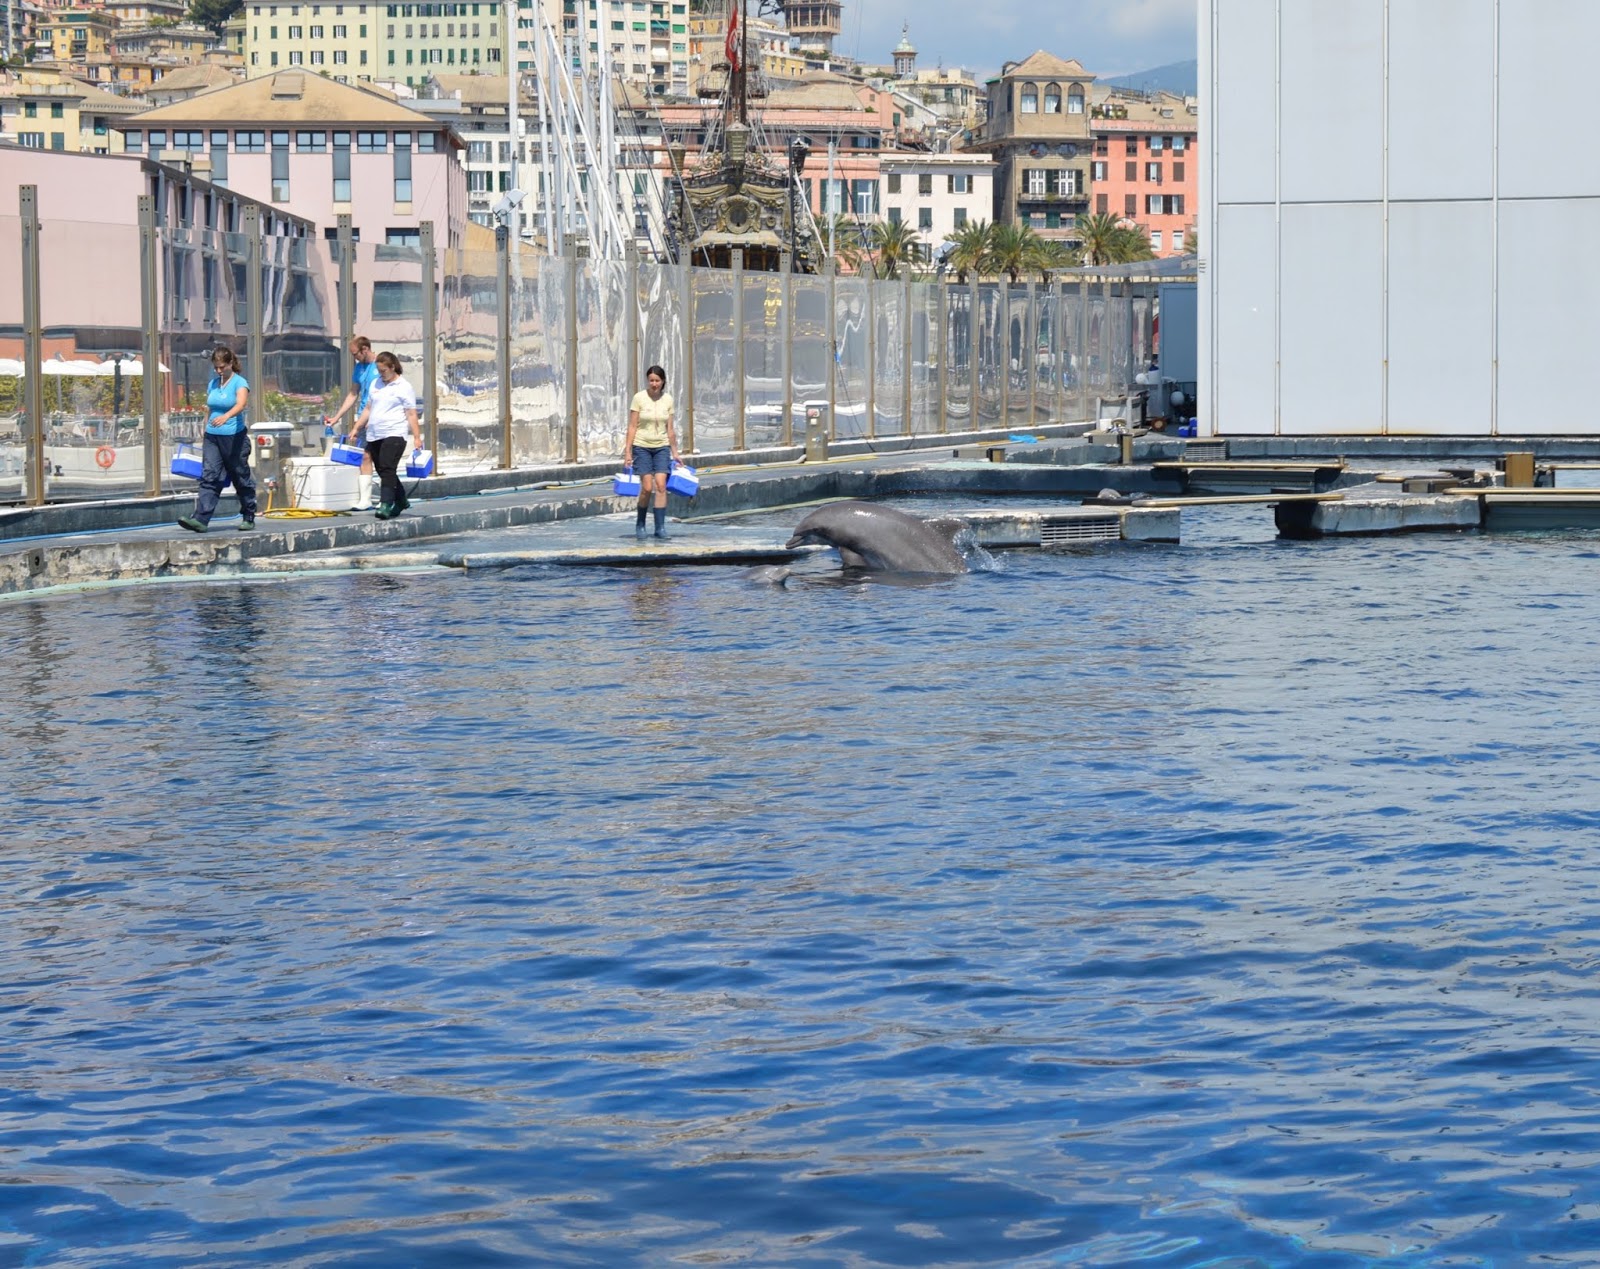 How to spend a weekend in Genoa with kids - Genoa aquarium behind the scenes tour - dolphins